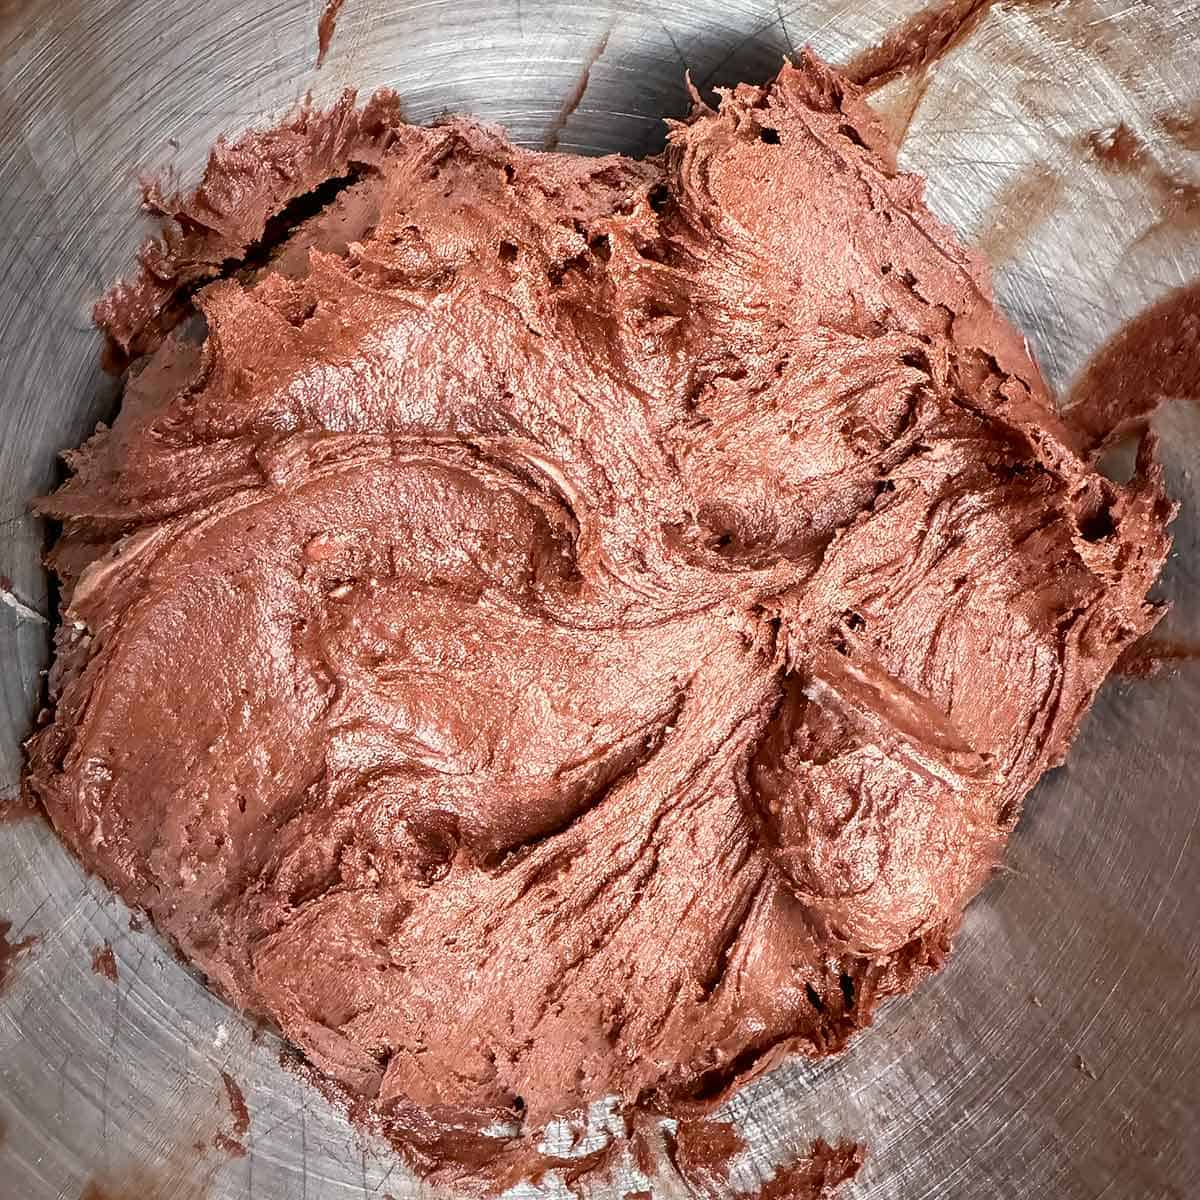 Chocolate cookie mixture all mixed in a mixer bowl.